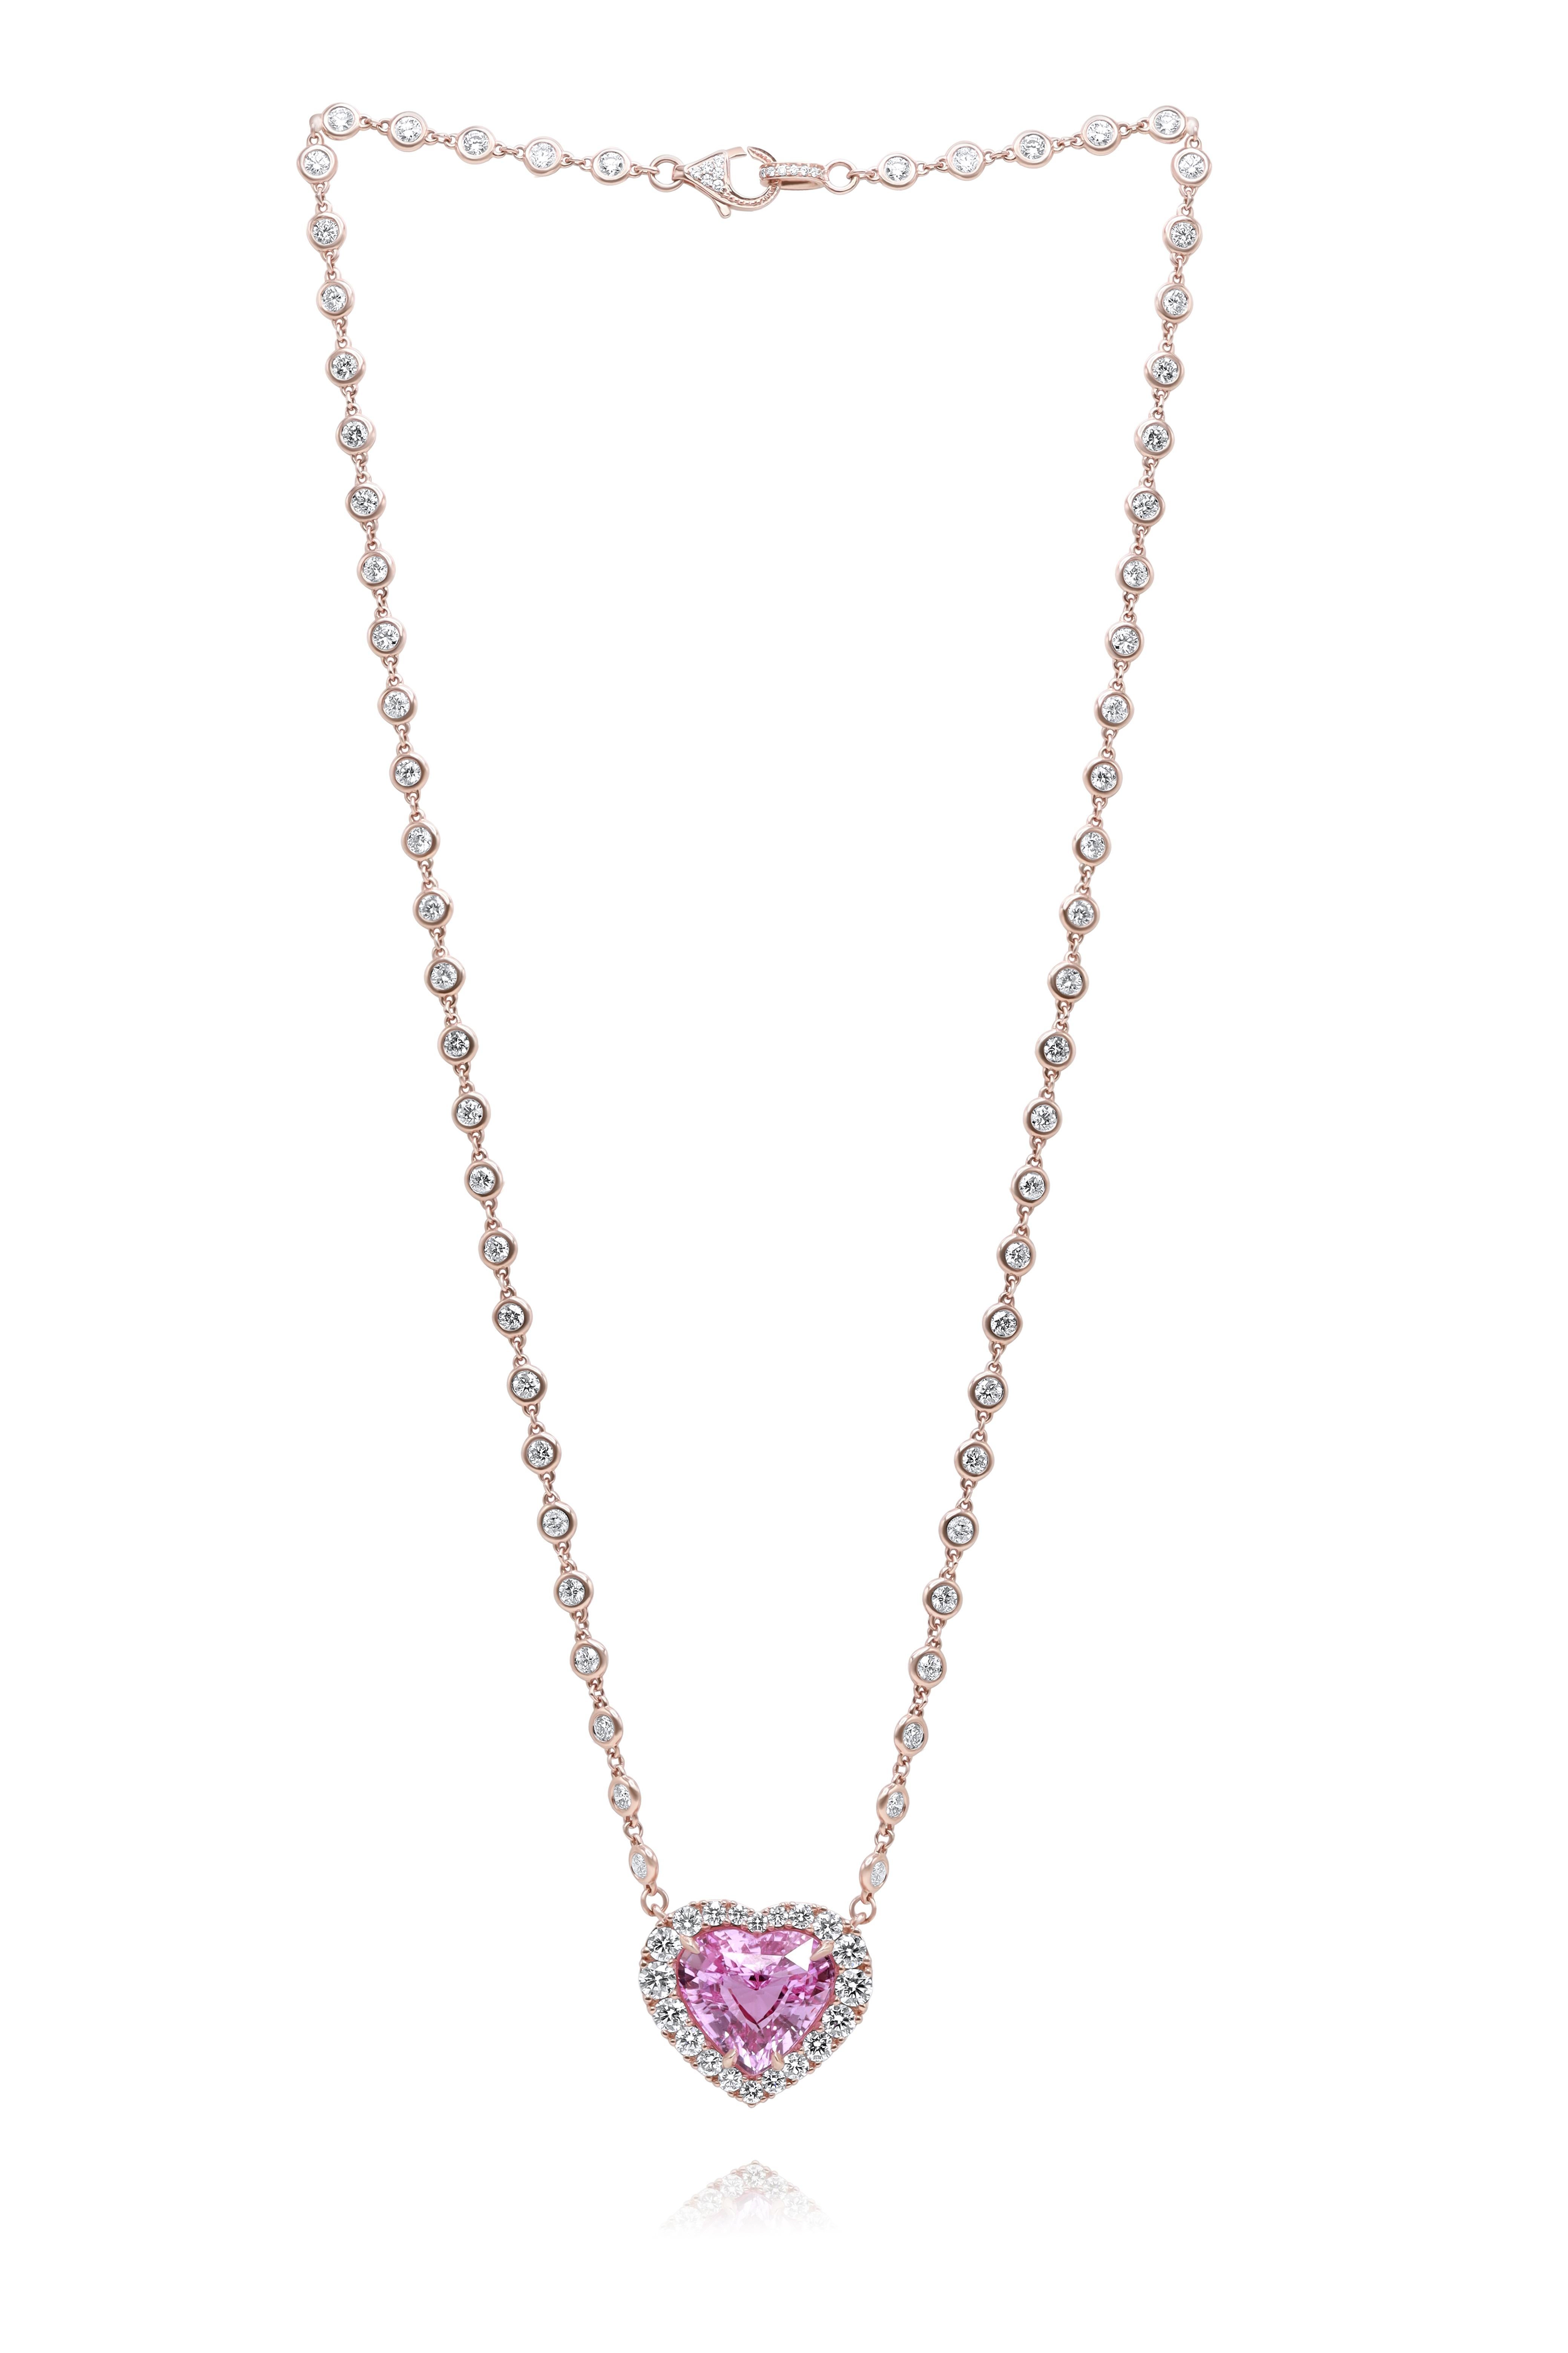 18kt Magnificent one-of-a-kind heart shape pink sapphire certified no heat 10.11cts. Adorned with 5.40cts of white diamonds on a rose gold diamonds -by the yard chain.